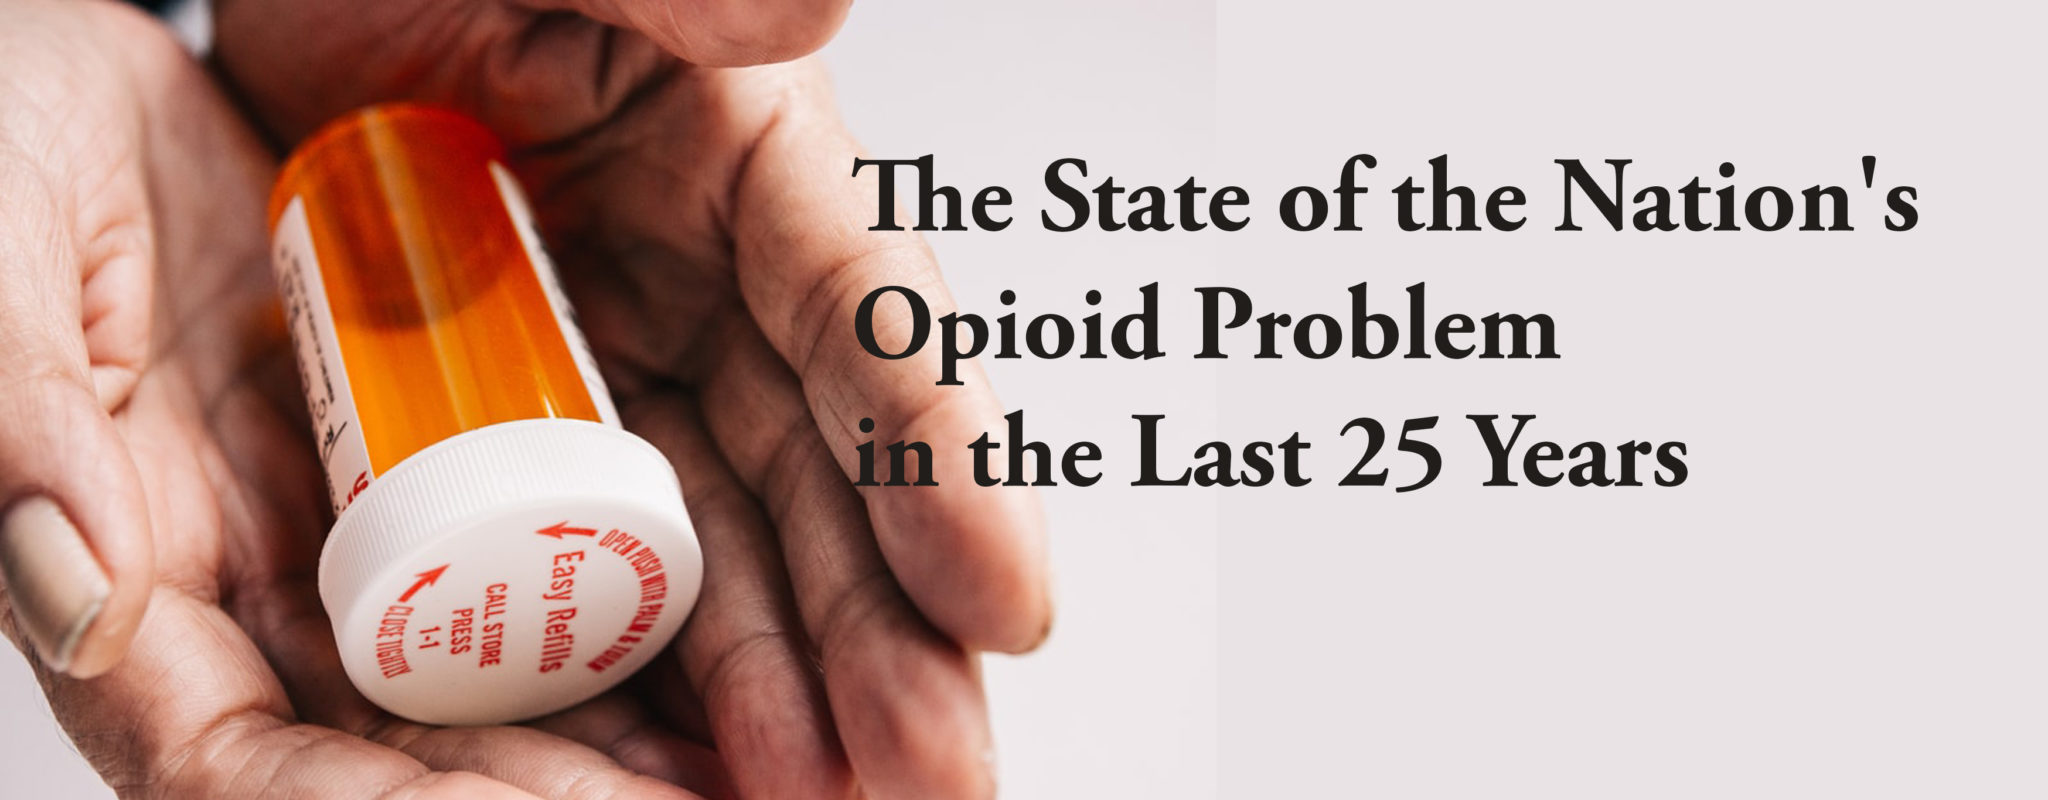 state of the nation opioid epidemic in the united states